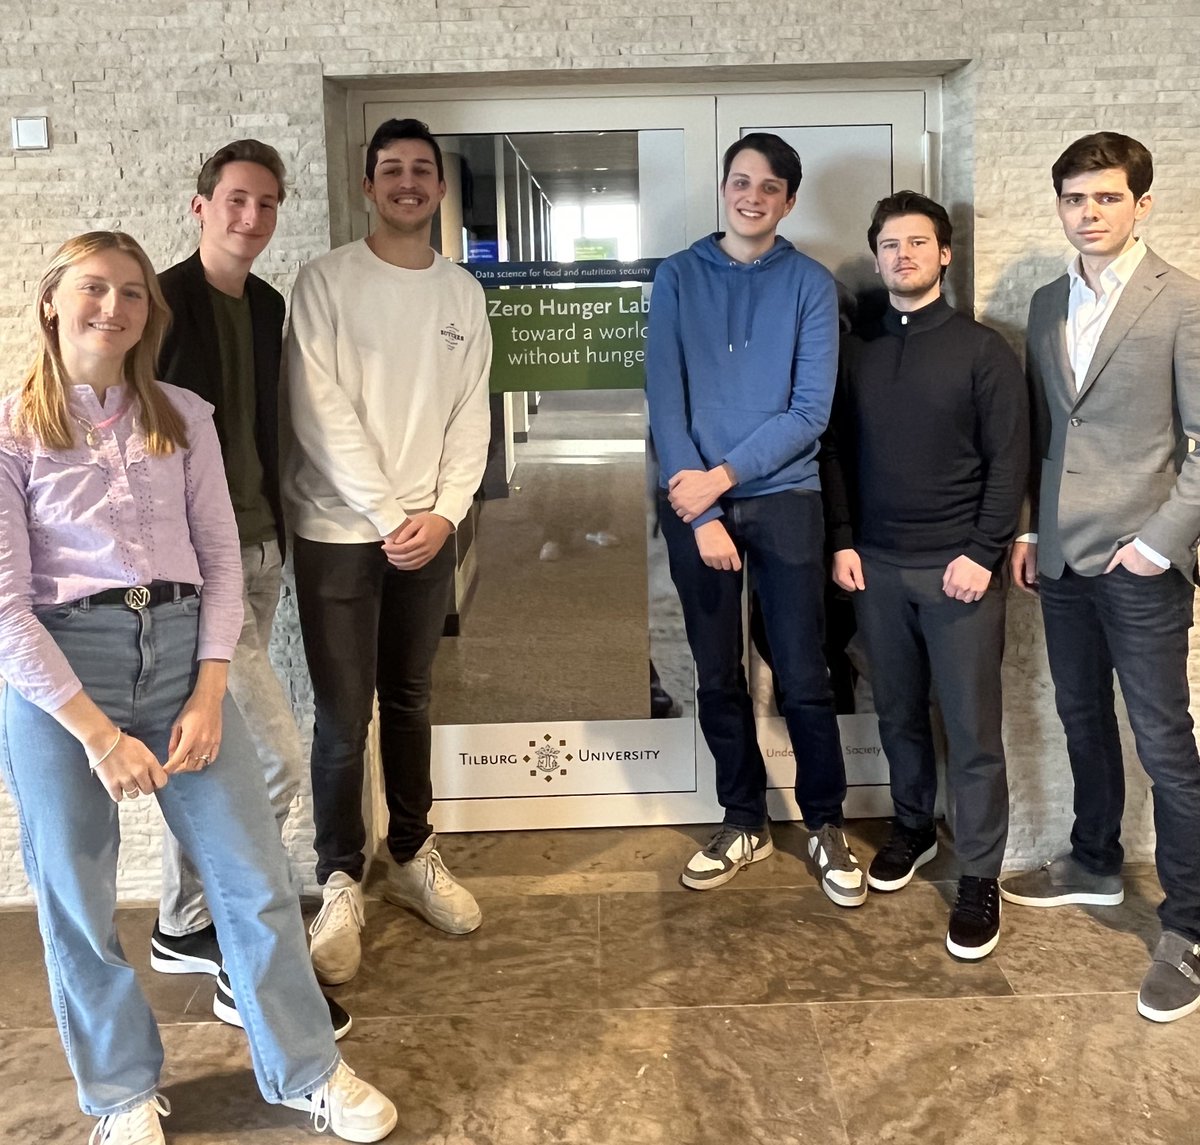 The Asset Consultancy Committee, study association for all students studying Econometrics @tilburguni has successfully developed a powerful forecasting tool for @VoedselbankenNL. This impactful project was guided by Meike Reusken from @ZeroHungerLab.